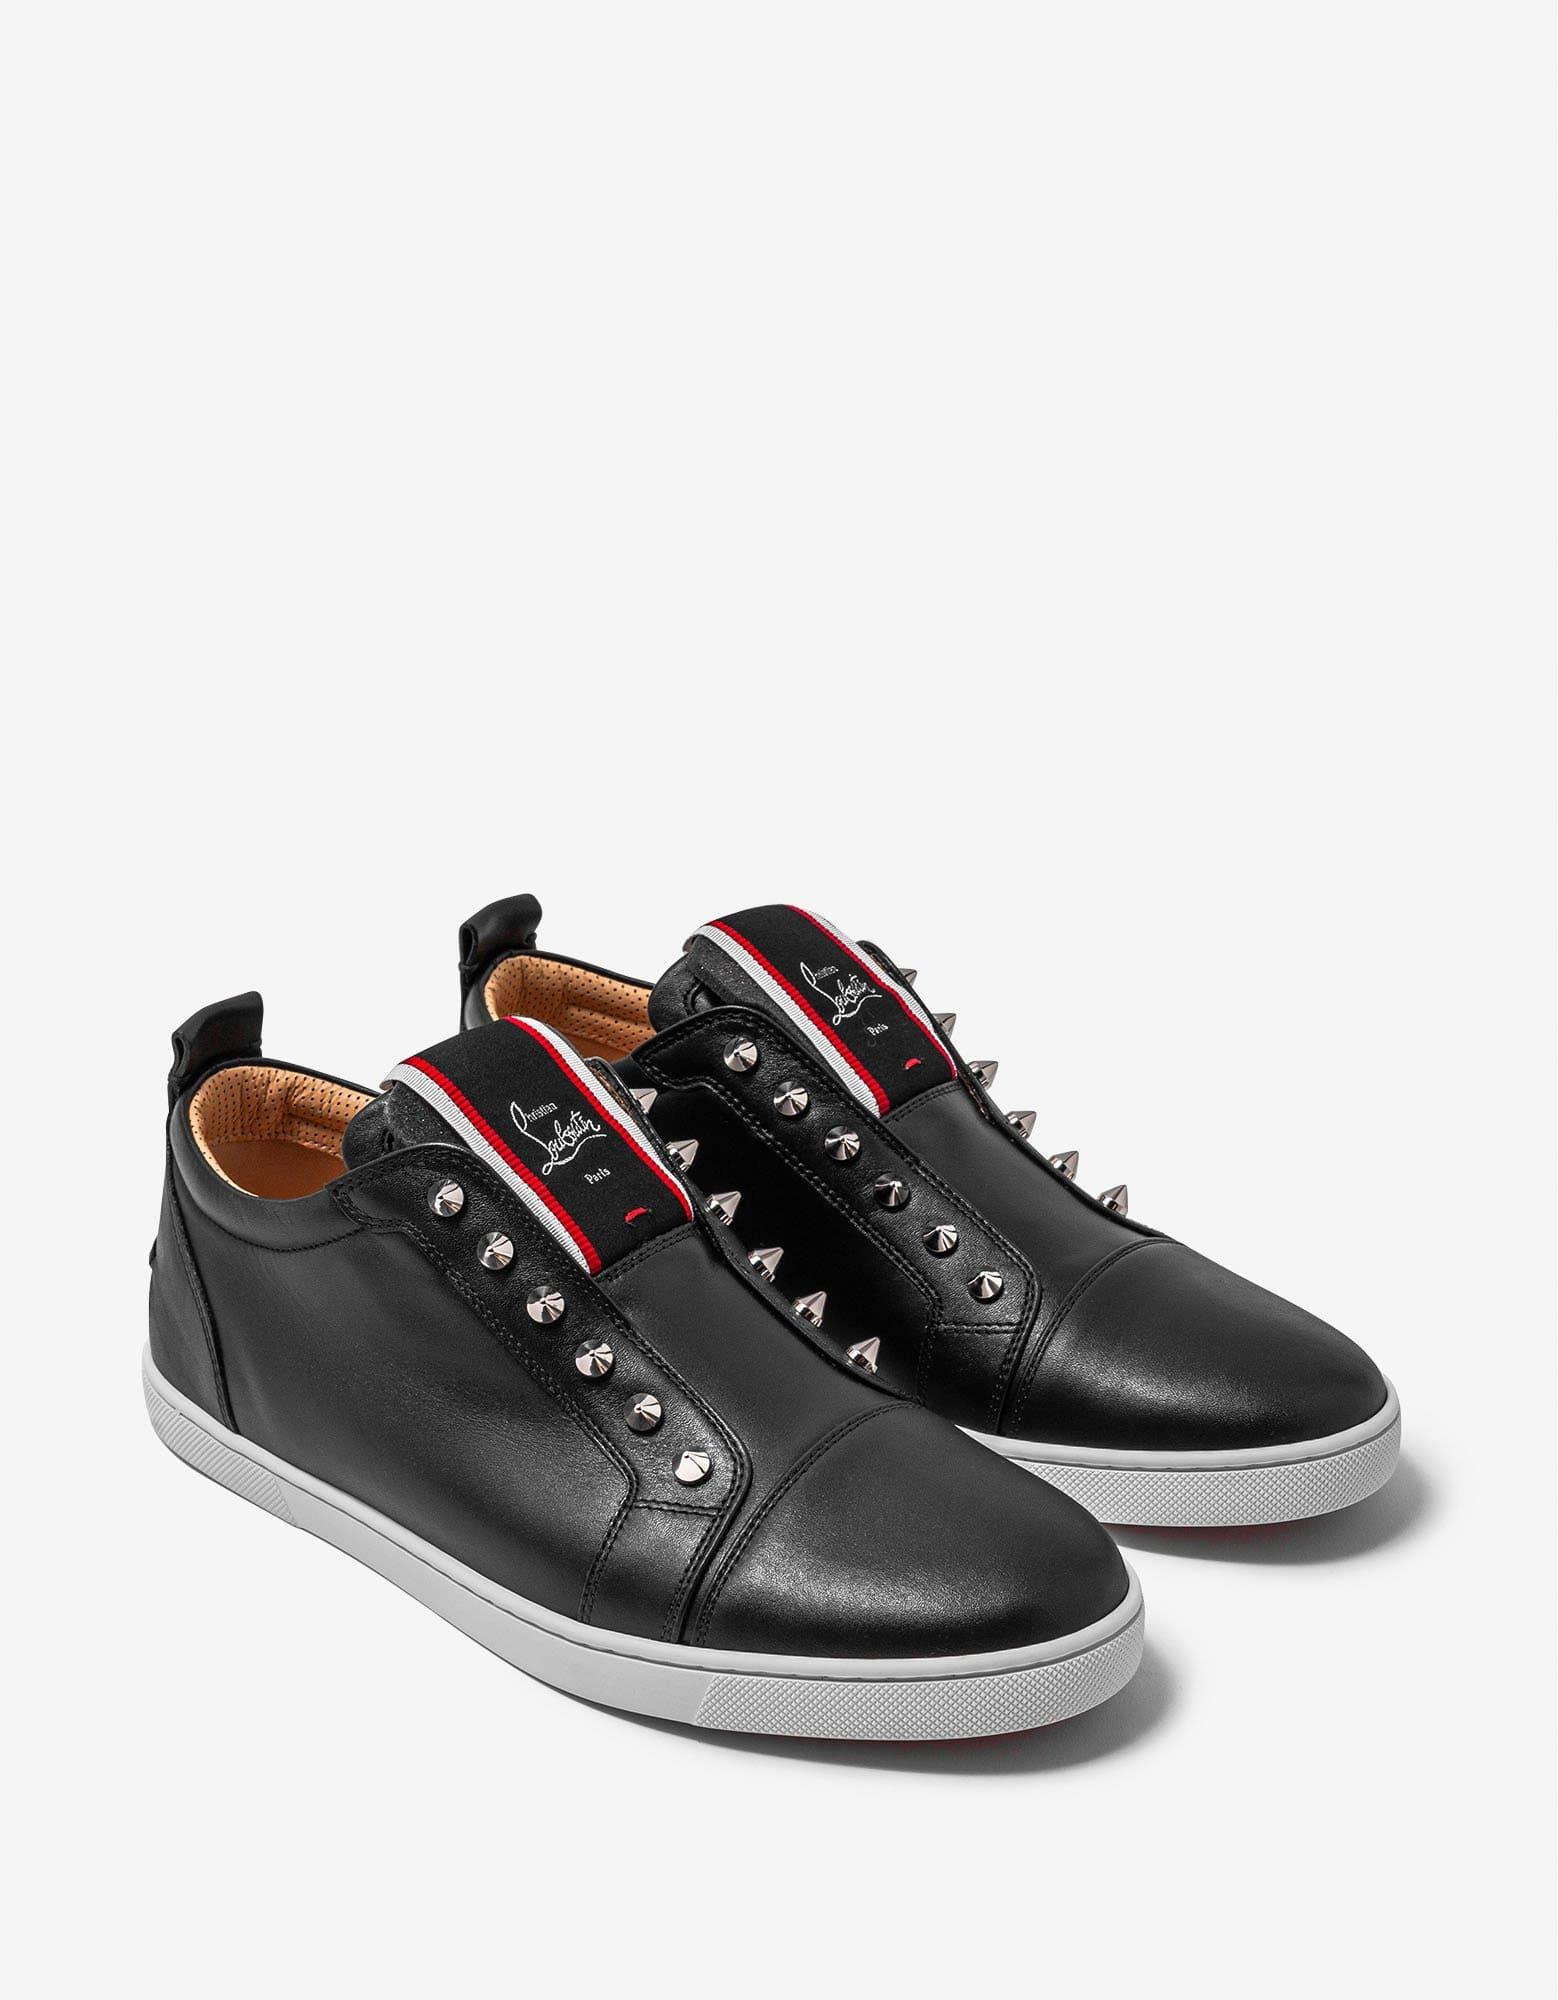 Leather trainers Christian Louboutin Black size 42 EU in Leather - 20487125